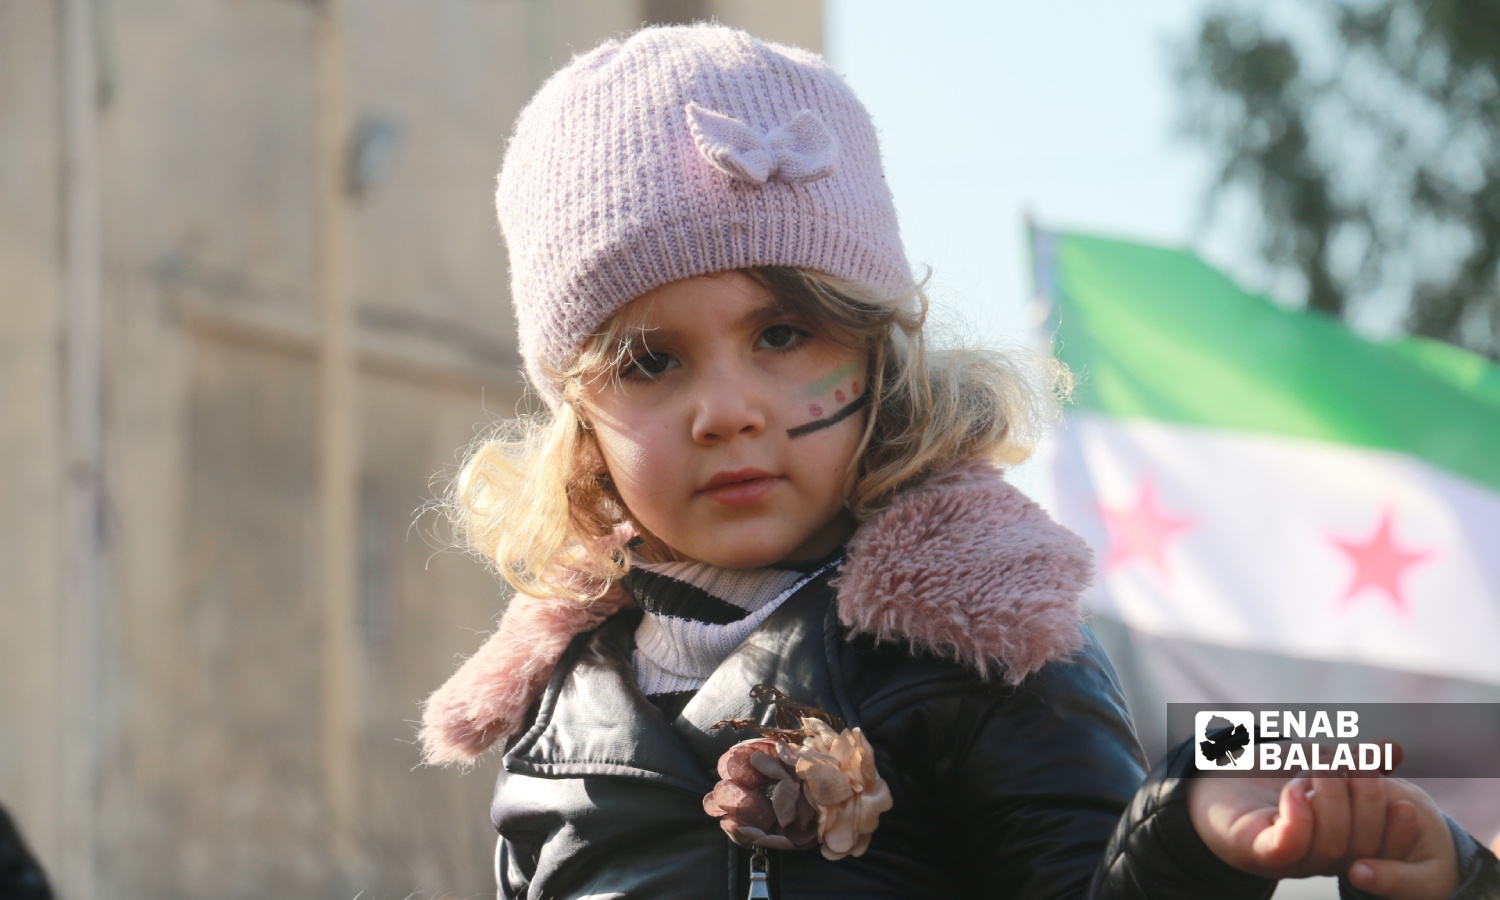 Children along with their families participate in Friday’s demonstration of border Azaz city in the northern countryside of Aleppo, denouncing the Turkish statements about rapprochement with the Syrian regime, affirming the continuation of the Syrian revolution - 30 December 2022 (Enab Baladi/Dayan Junpaz)